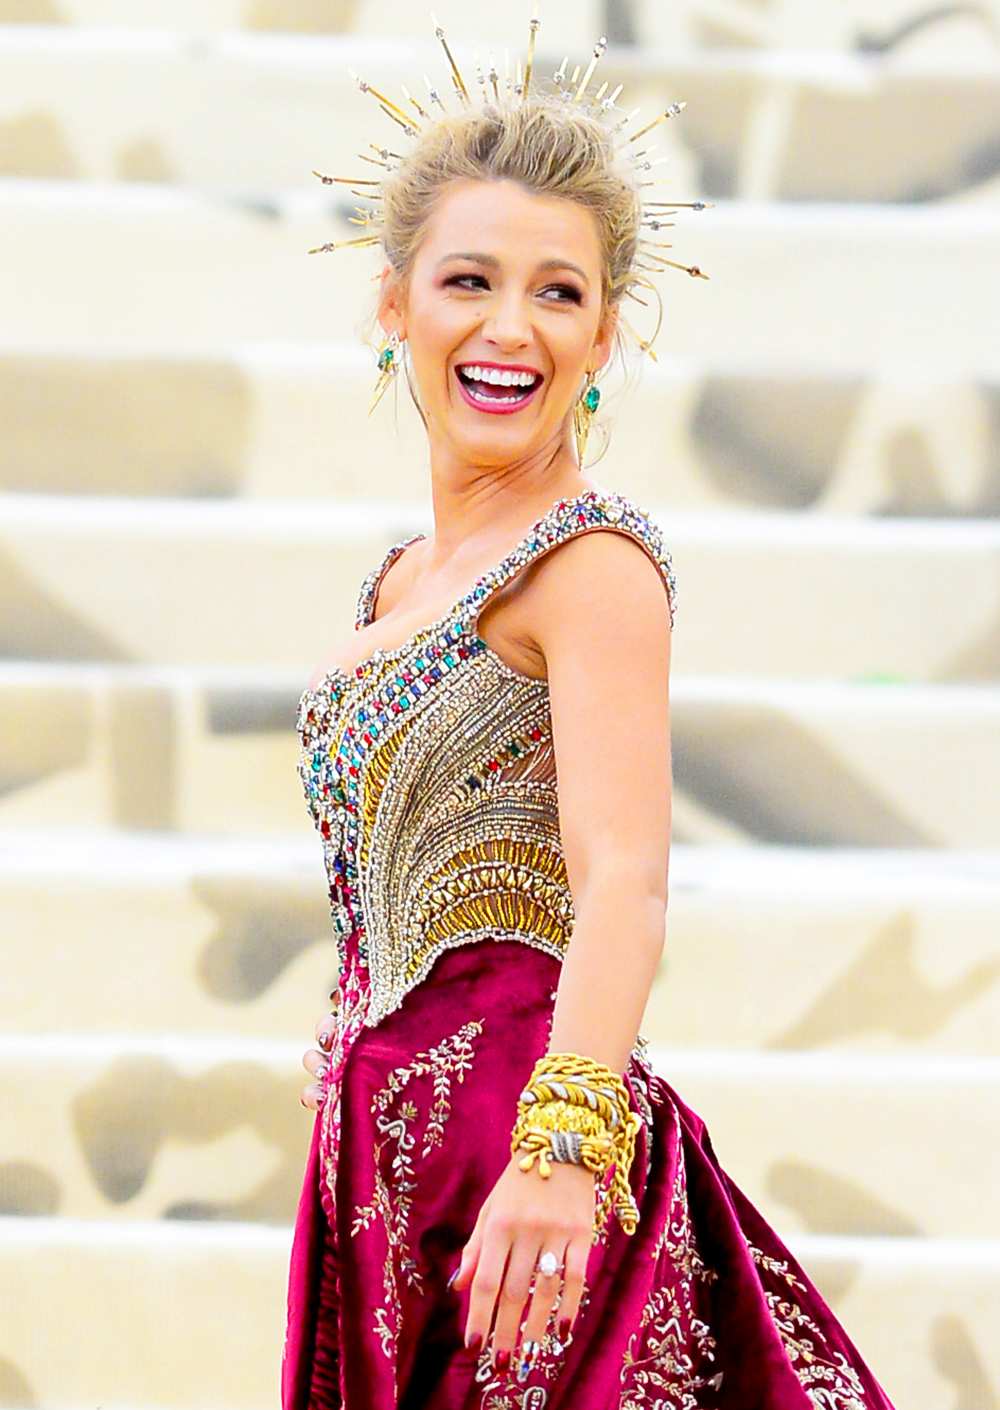 Blake Lively attends the Heavenly Bodies: Fashion & The Catholic Imagination Costume Institute Gala at The Metropolitan Museum of Ar at on May 7, 2018 in New York City.